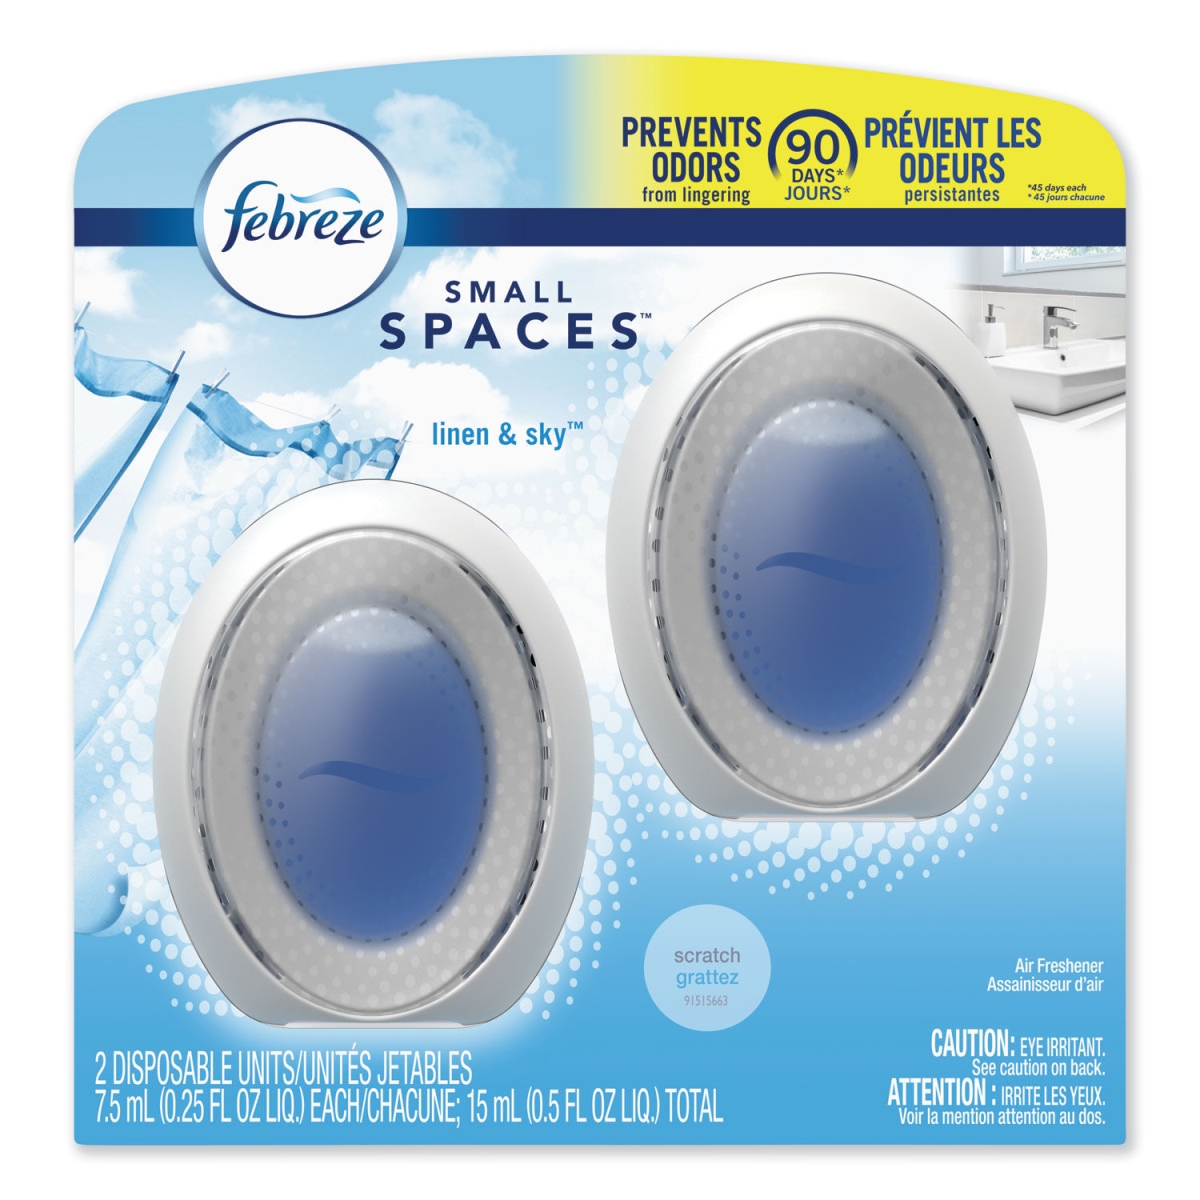 Pgc93326 0.25 Ml Small Spaces Linen & Sky Fresheners, 8 Per Pack - Pack Of 2